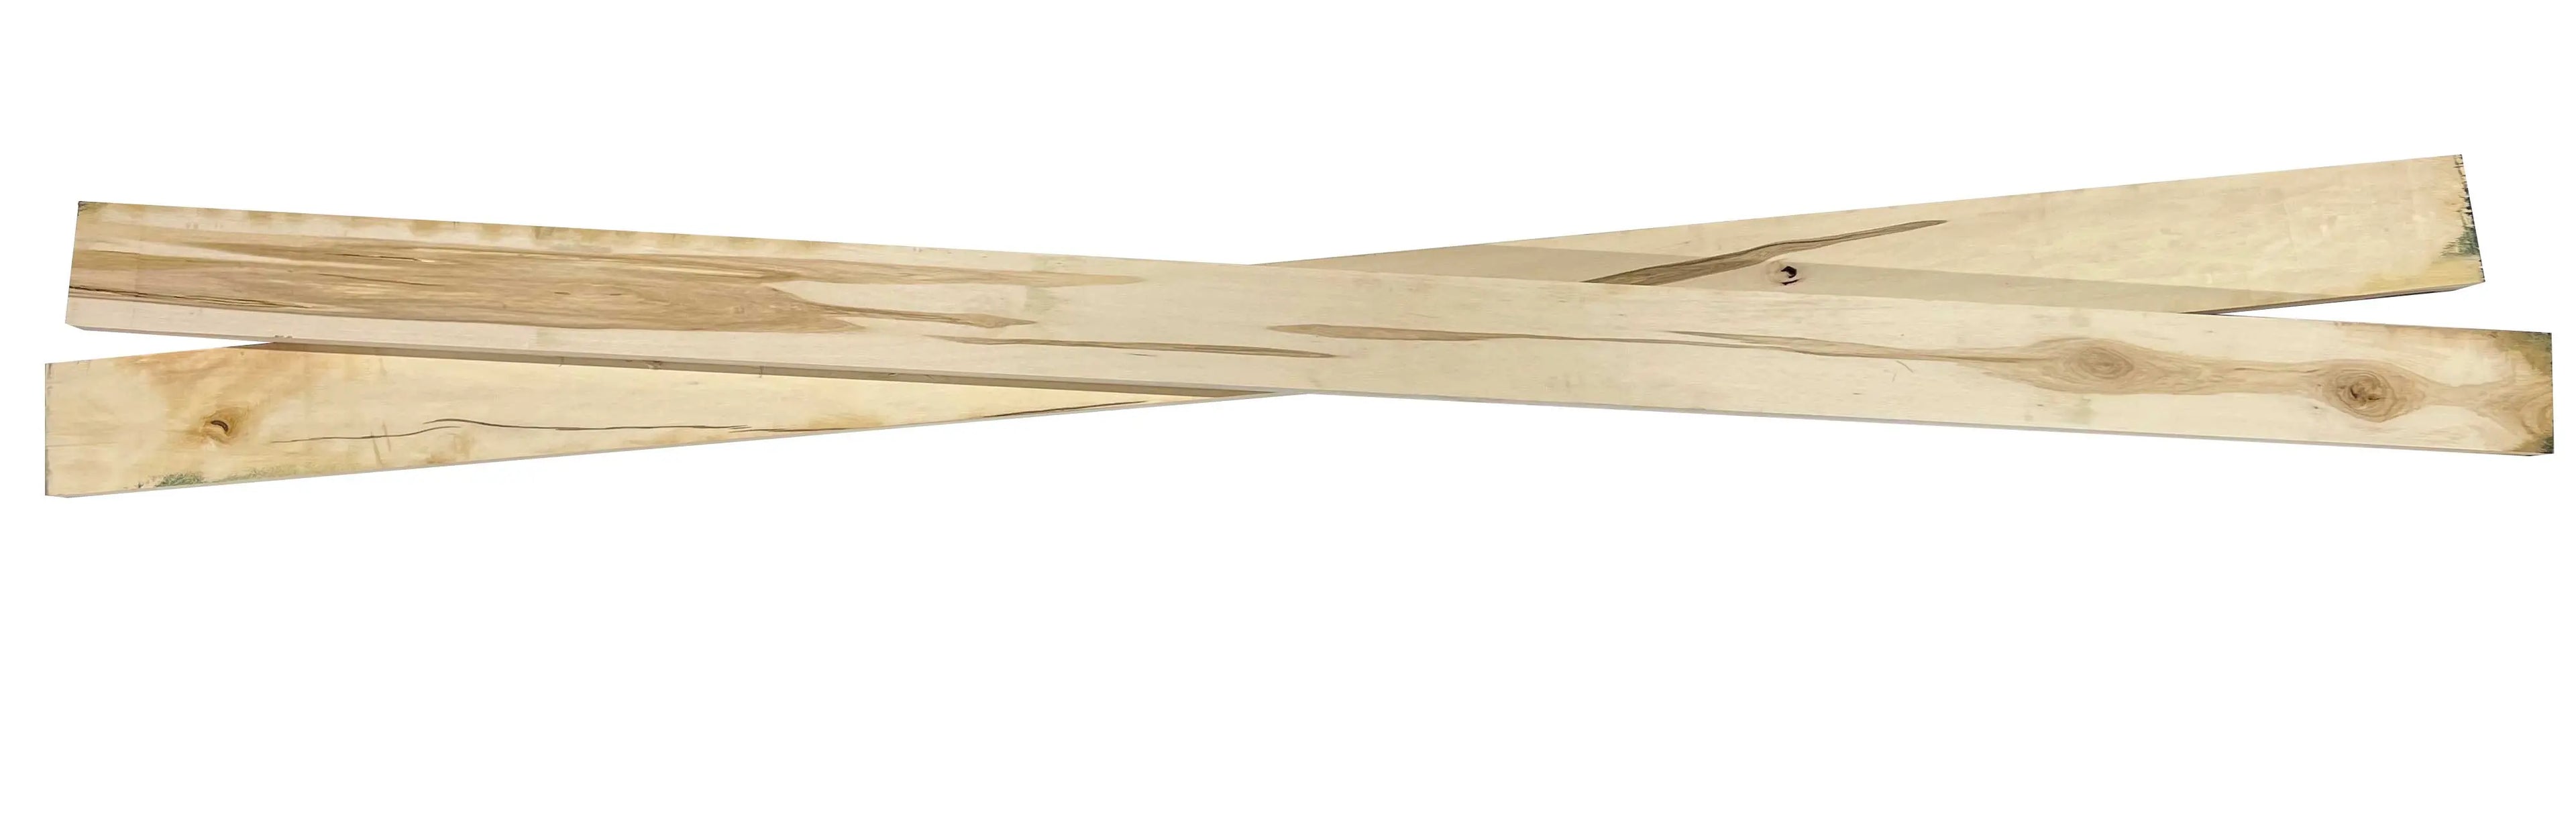 4/4 Basswood 4 wide 47 long (S4S)